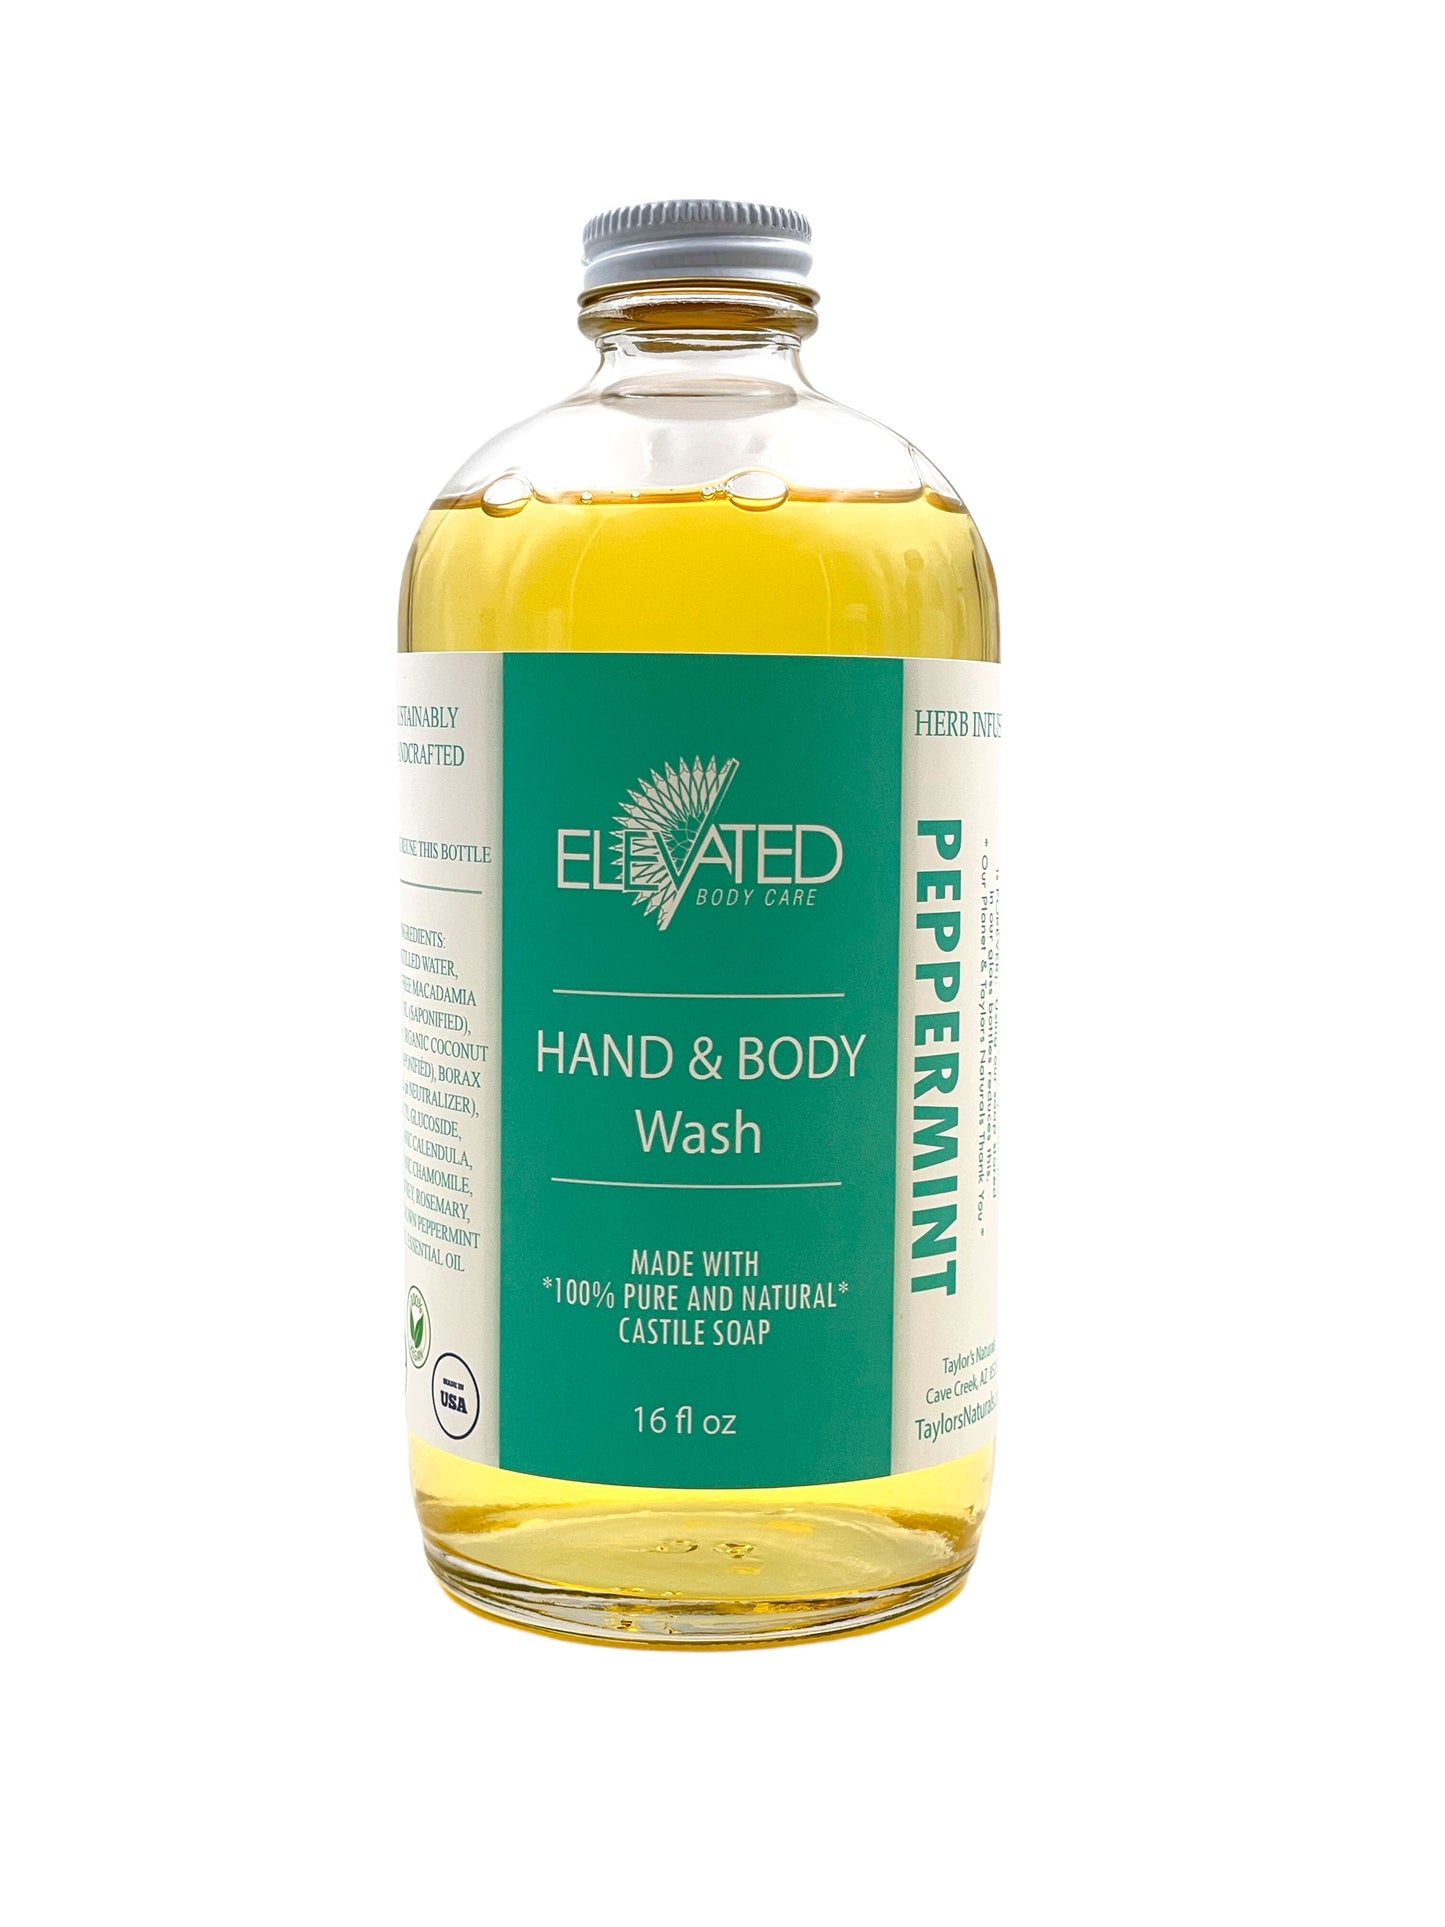 ELEVATED - Herbal Hand & Body Wash - Glass or Aluminum